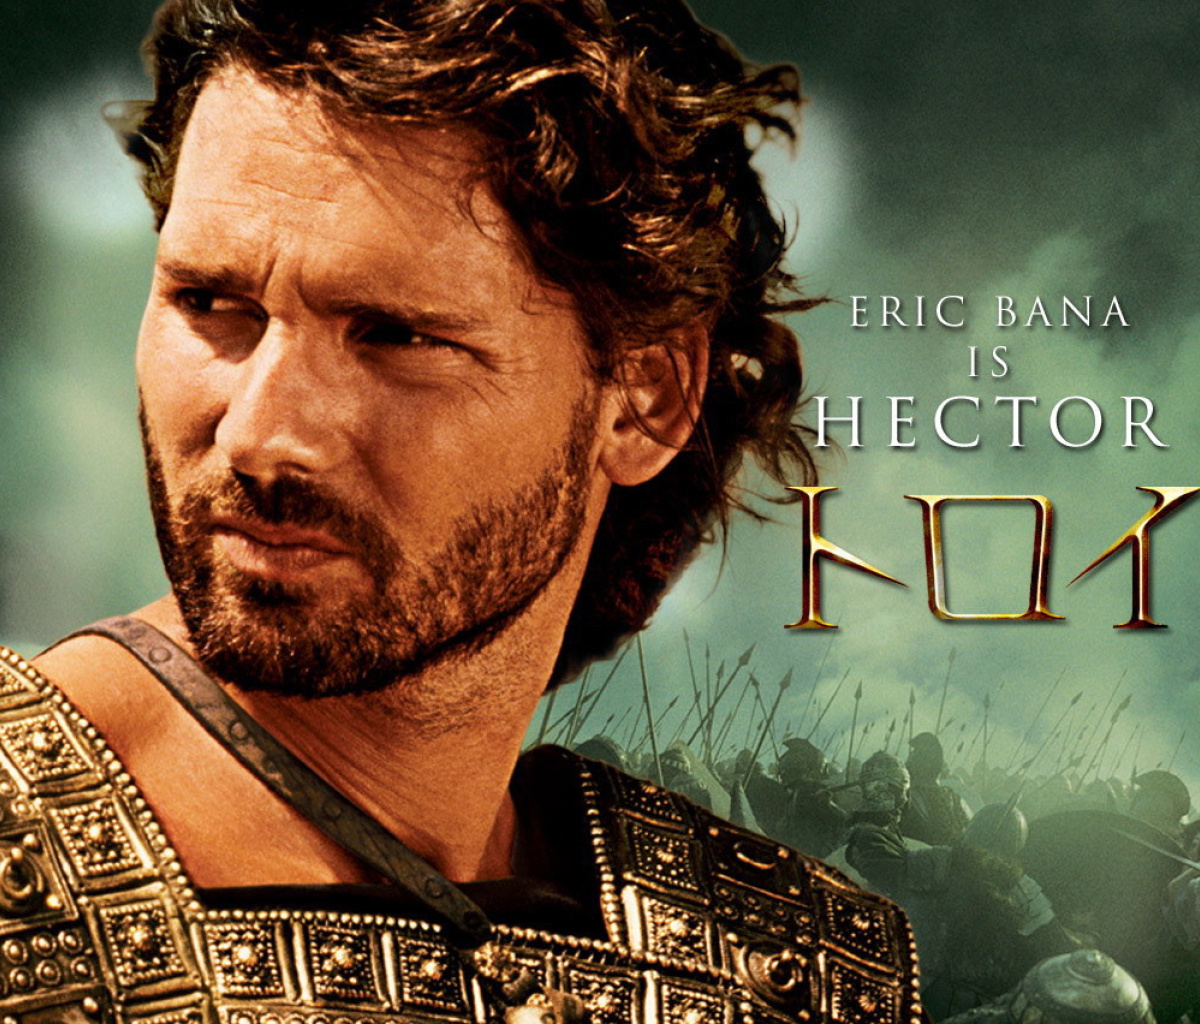 Eric Bana as Hector in Troy wallpaper 1200x1024